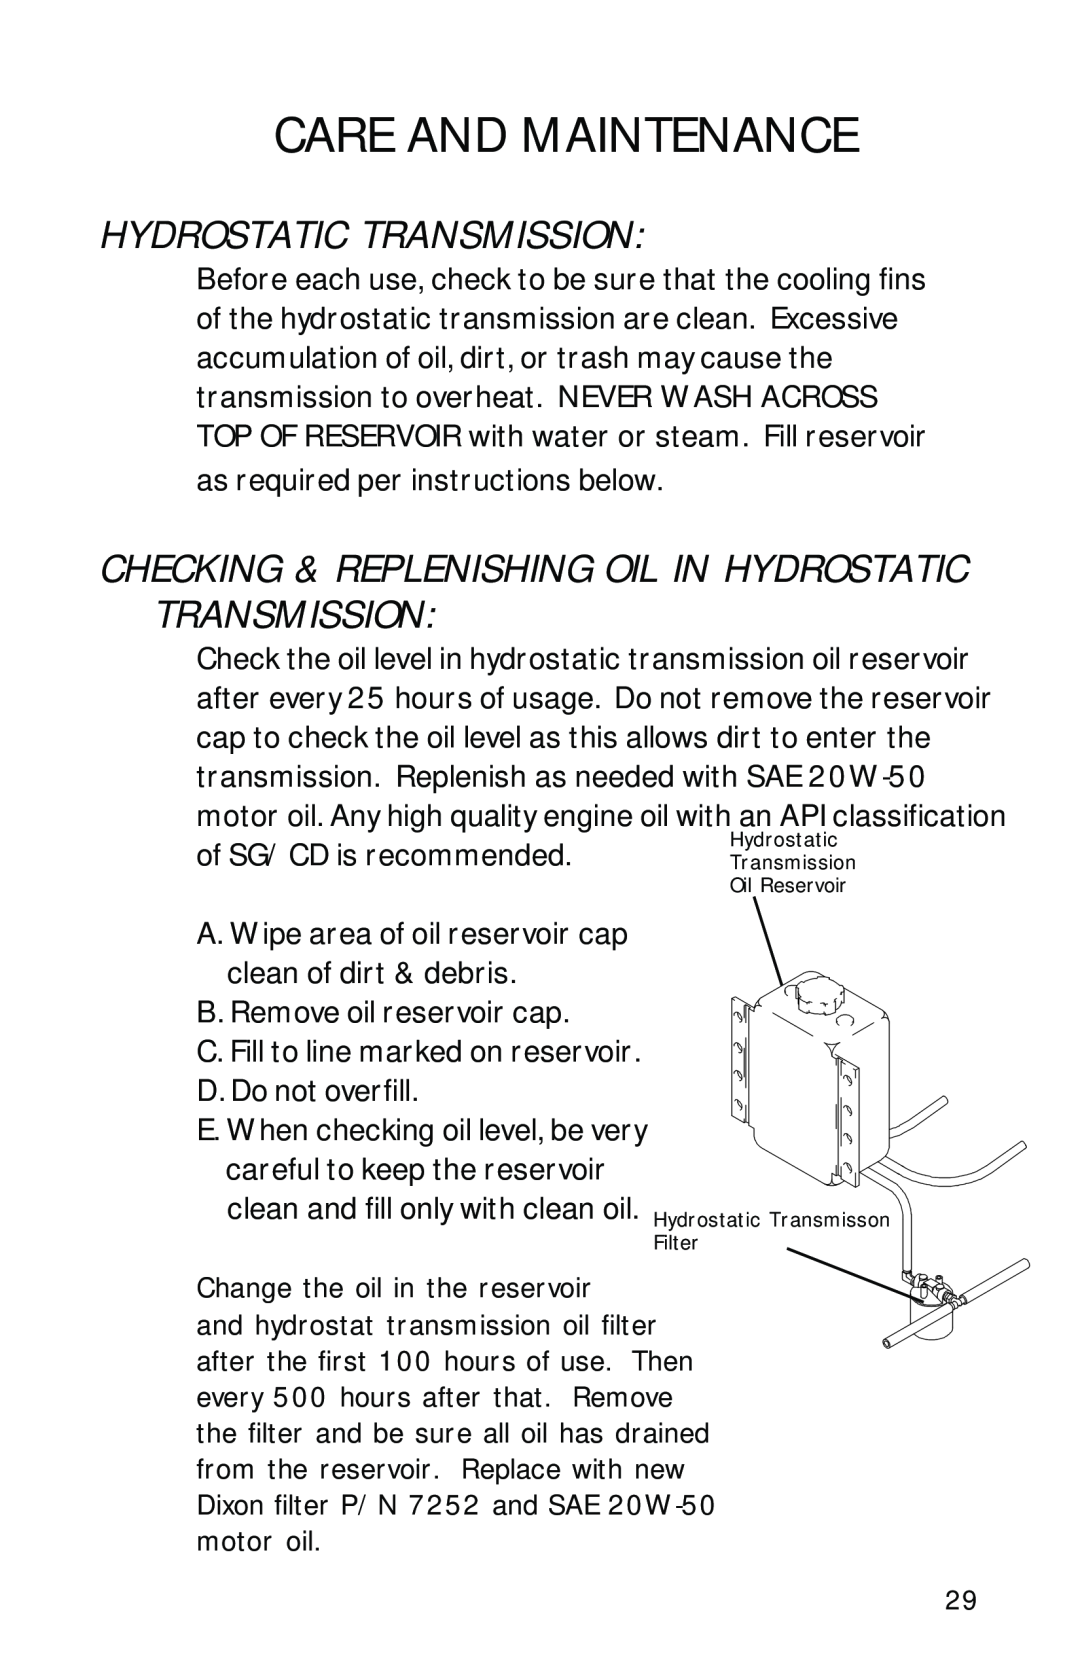 Dixon 13090-0601, ZTR 6023 manual Checking & Replenishing Oil In Hydrostatic Transmission, Care And Maintenance 